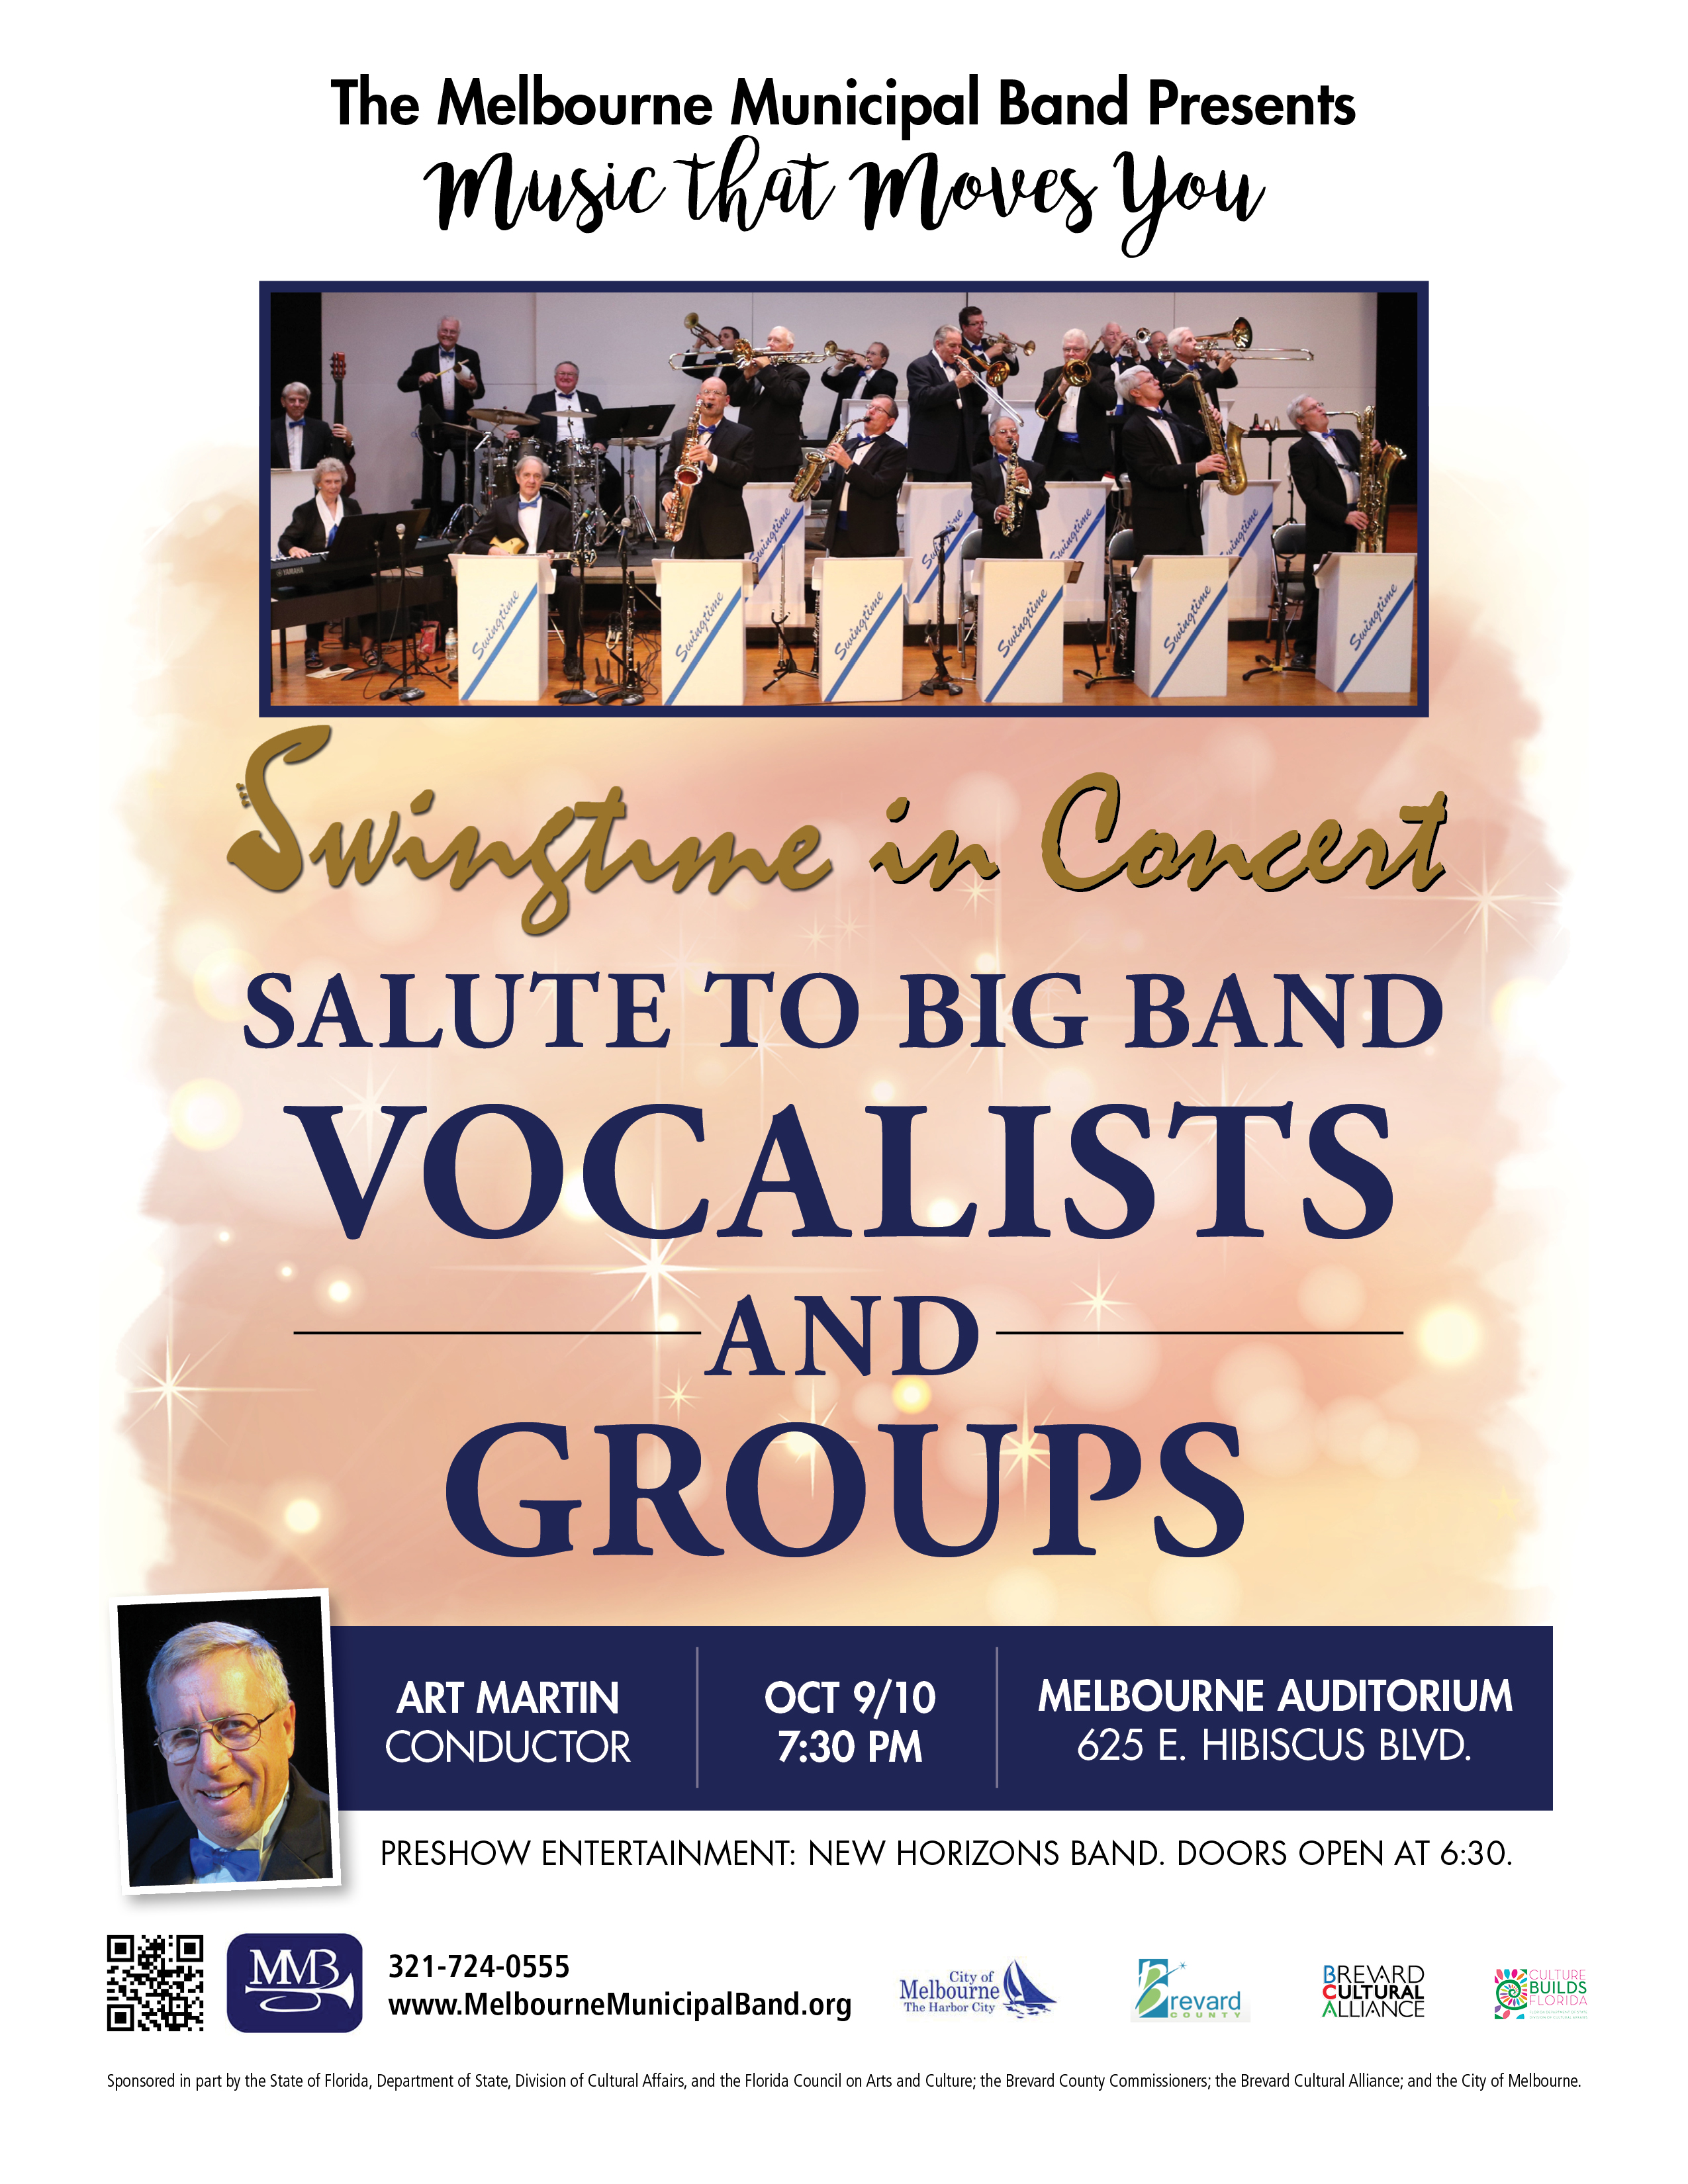 Salute to Big Band Vocalists and Groups presented by The Melbourne Municipal Band